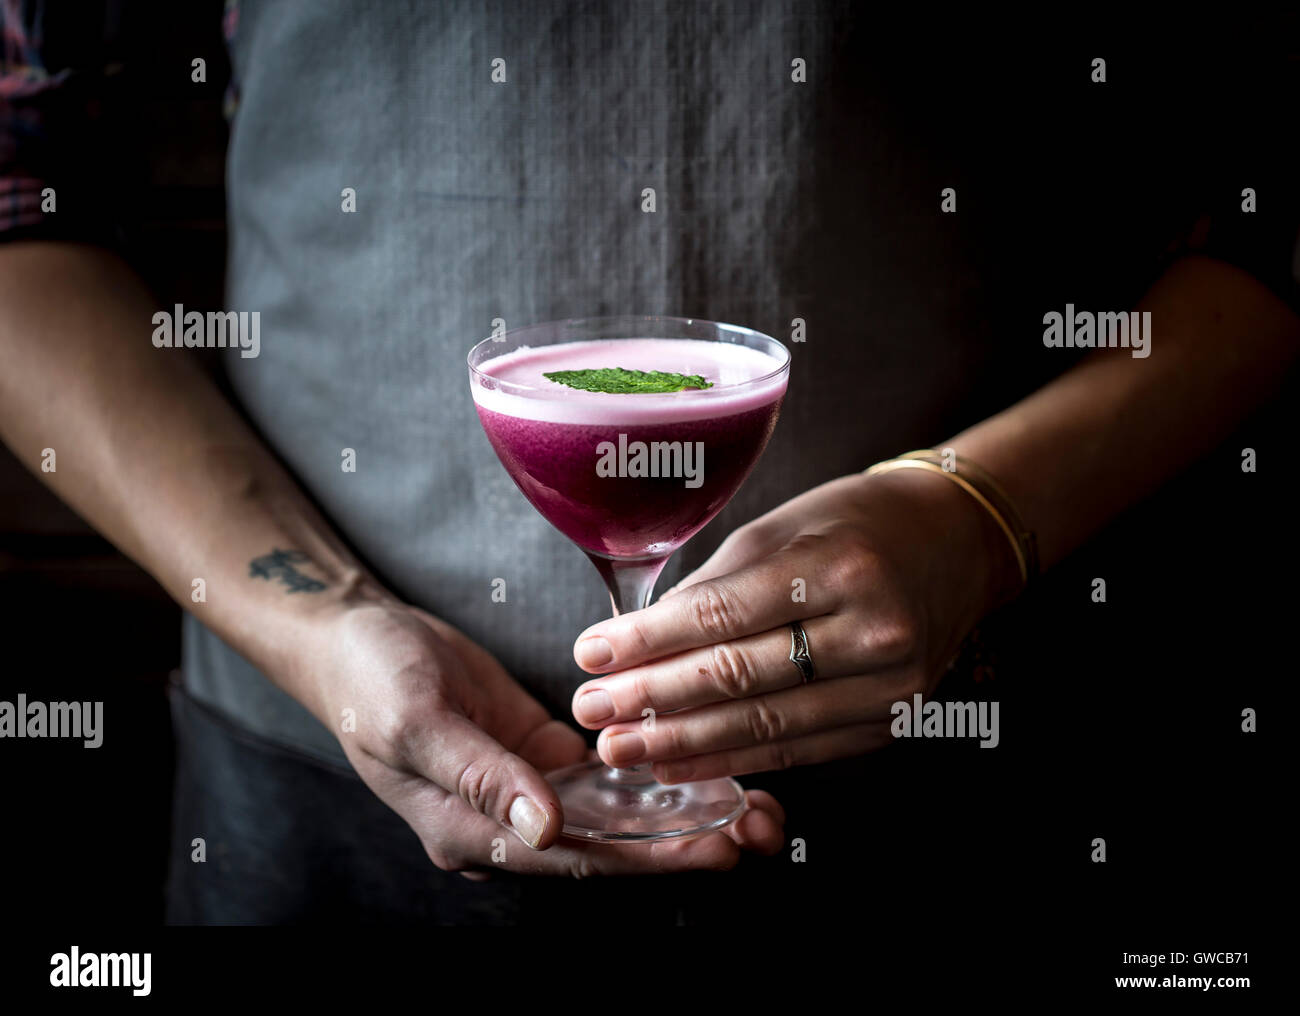 A woman is holding a blueberry cocktail in a coupe glass in her hands photographed from the front view. Stock Photo